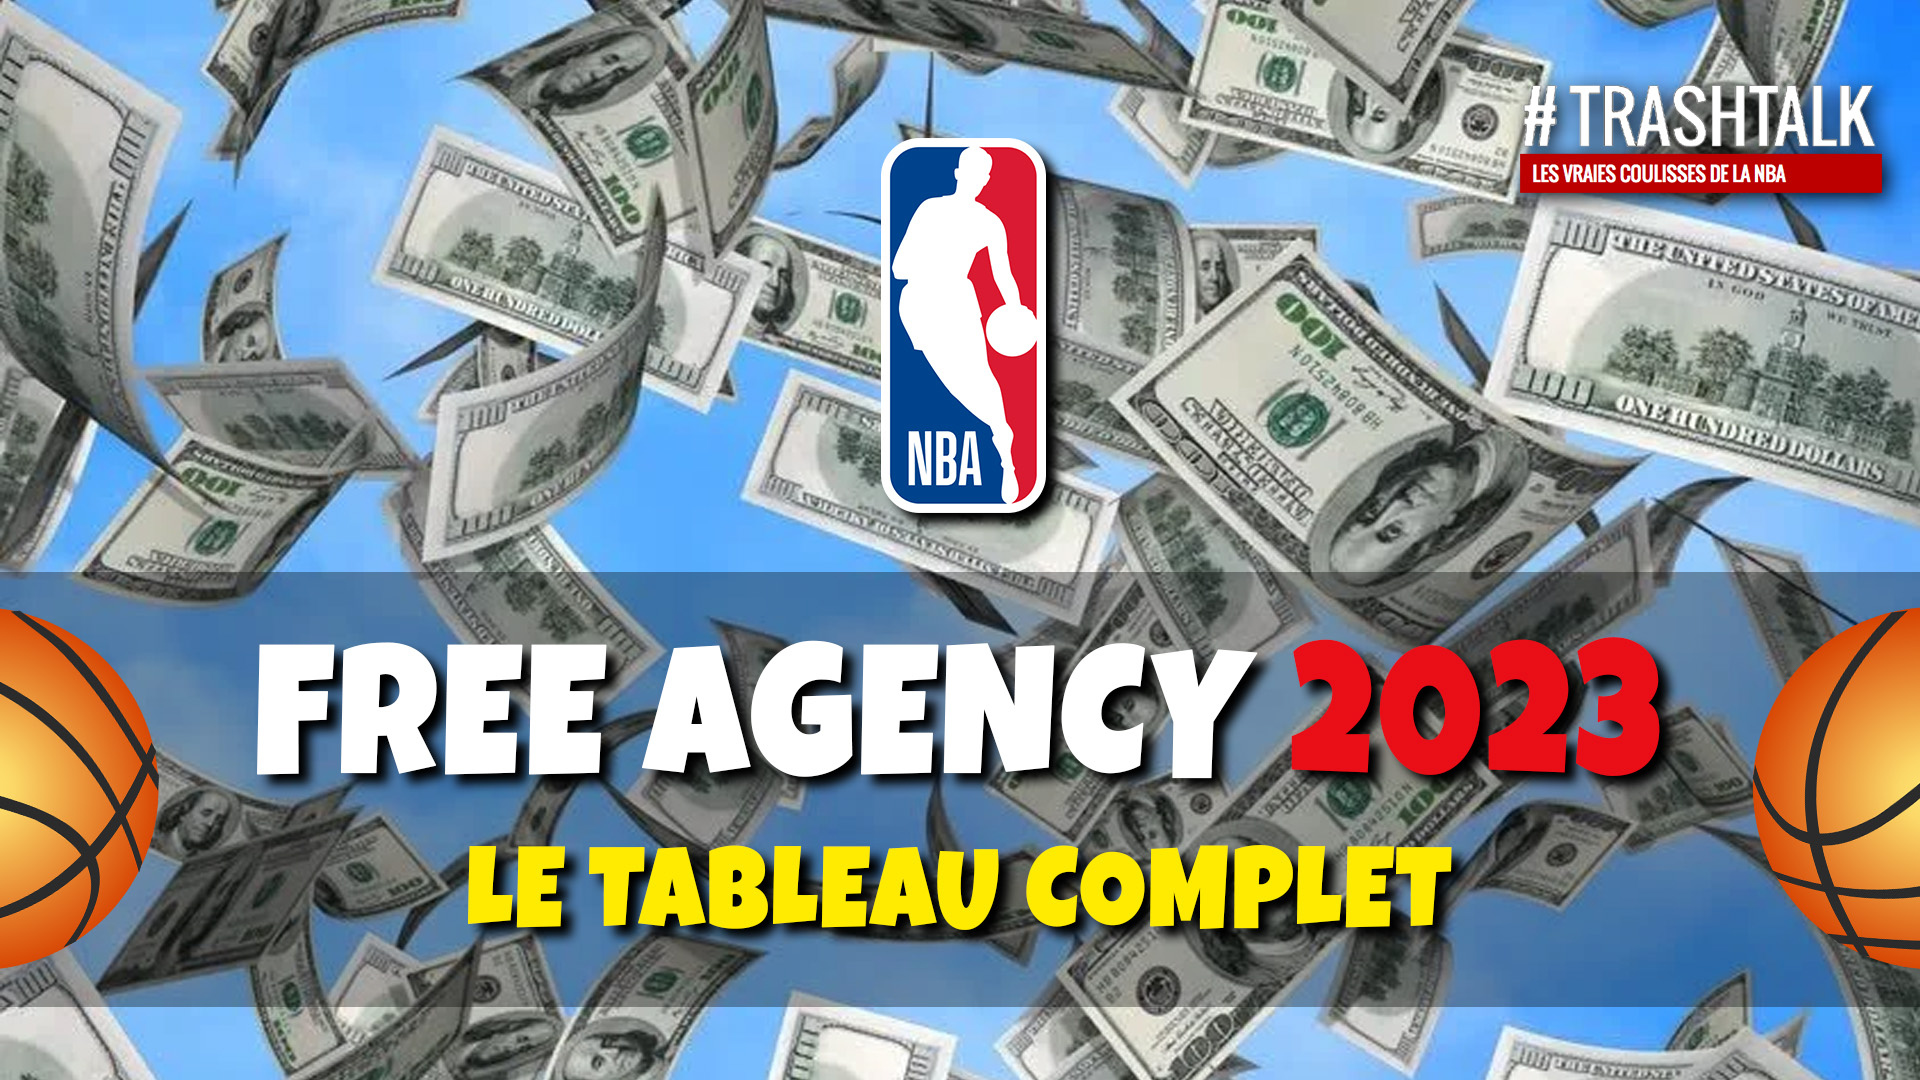 Complete Summary of NBA Free Agency 2023 All the Moves, Transfers, and